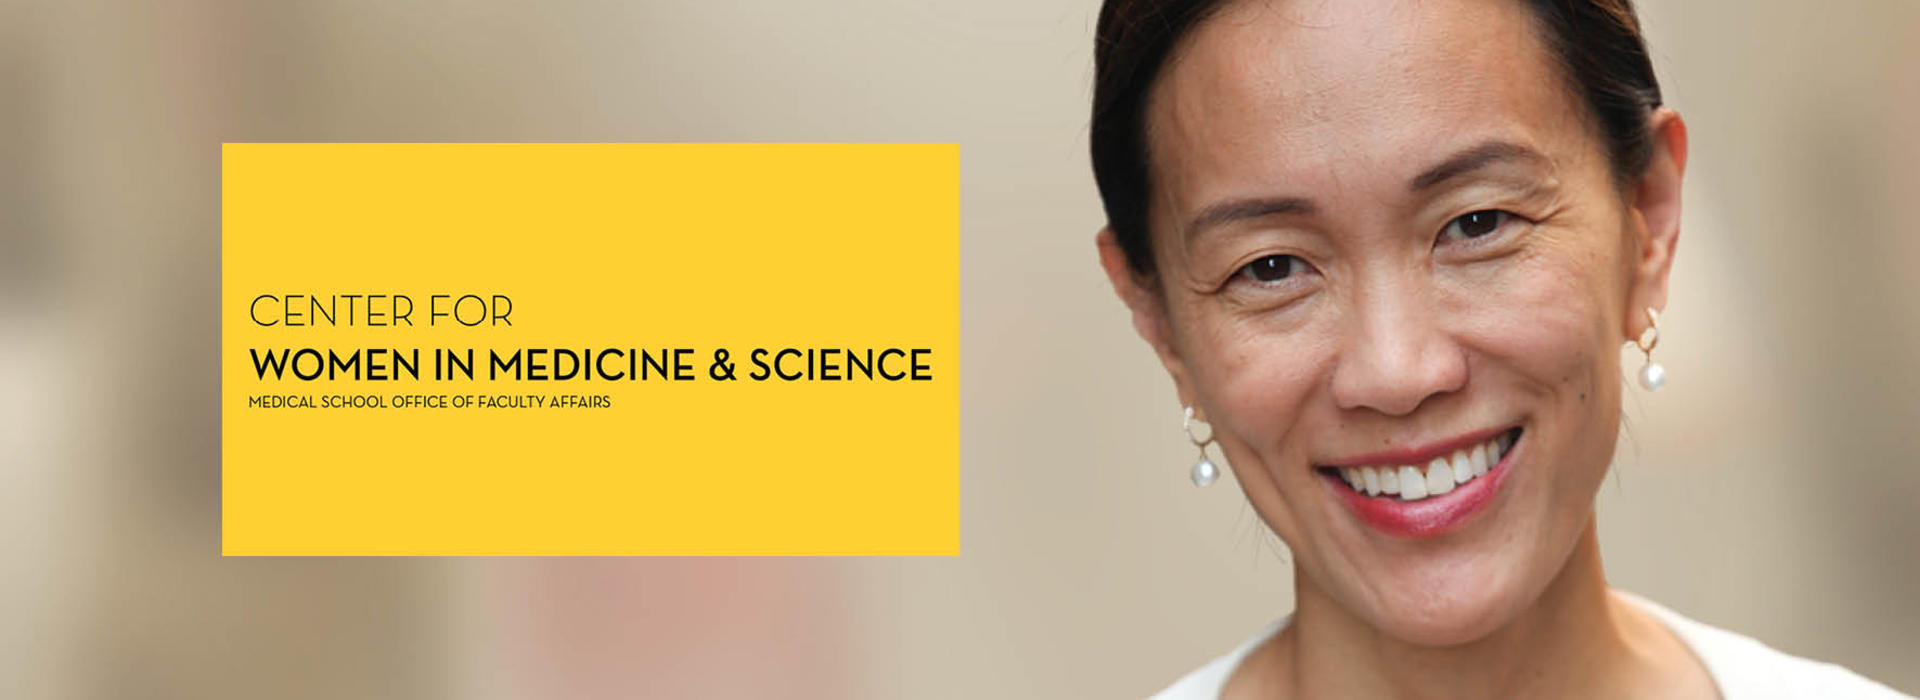 Dr. Esther Choo and Center for Women in Medicine and Science